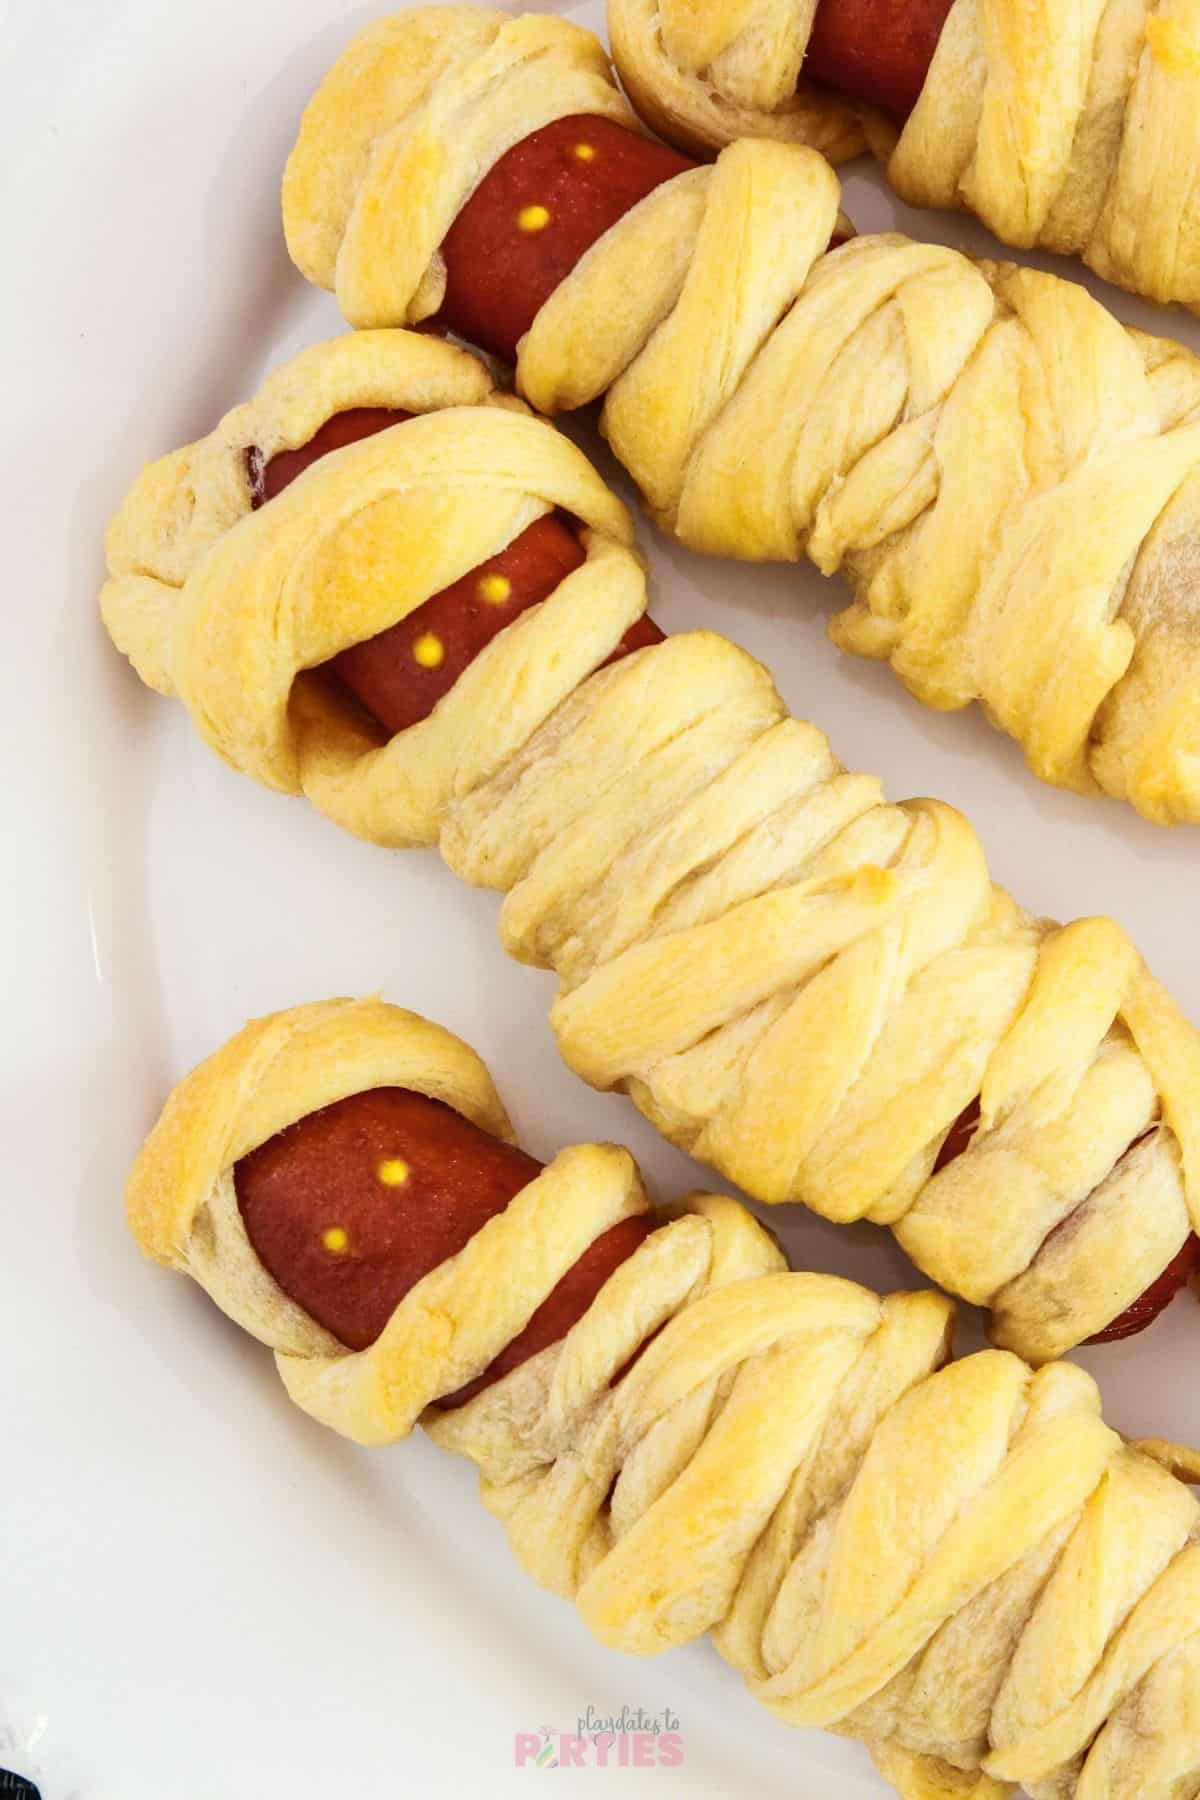 Cooked mummy dogs on a white plate with edible eyes.